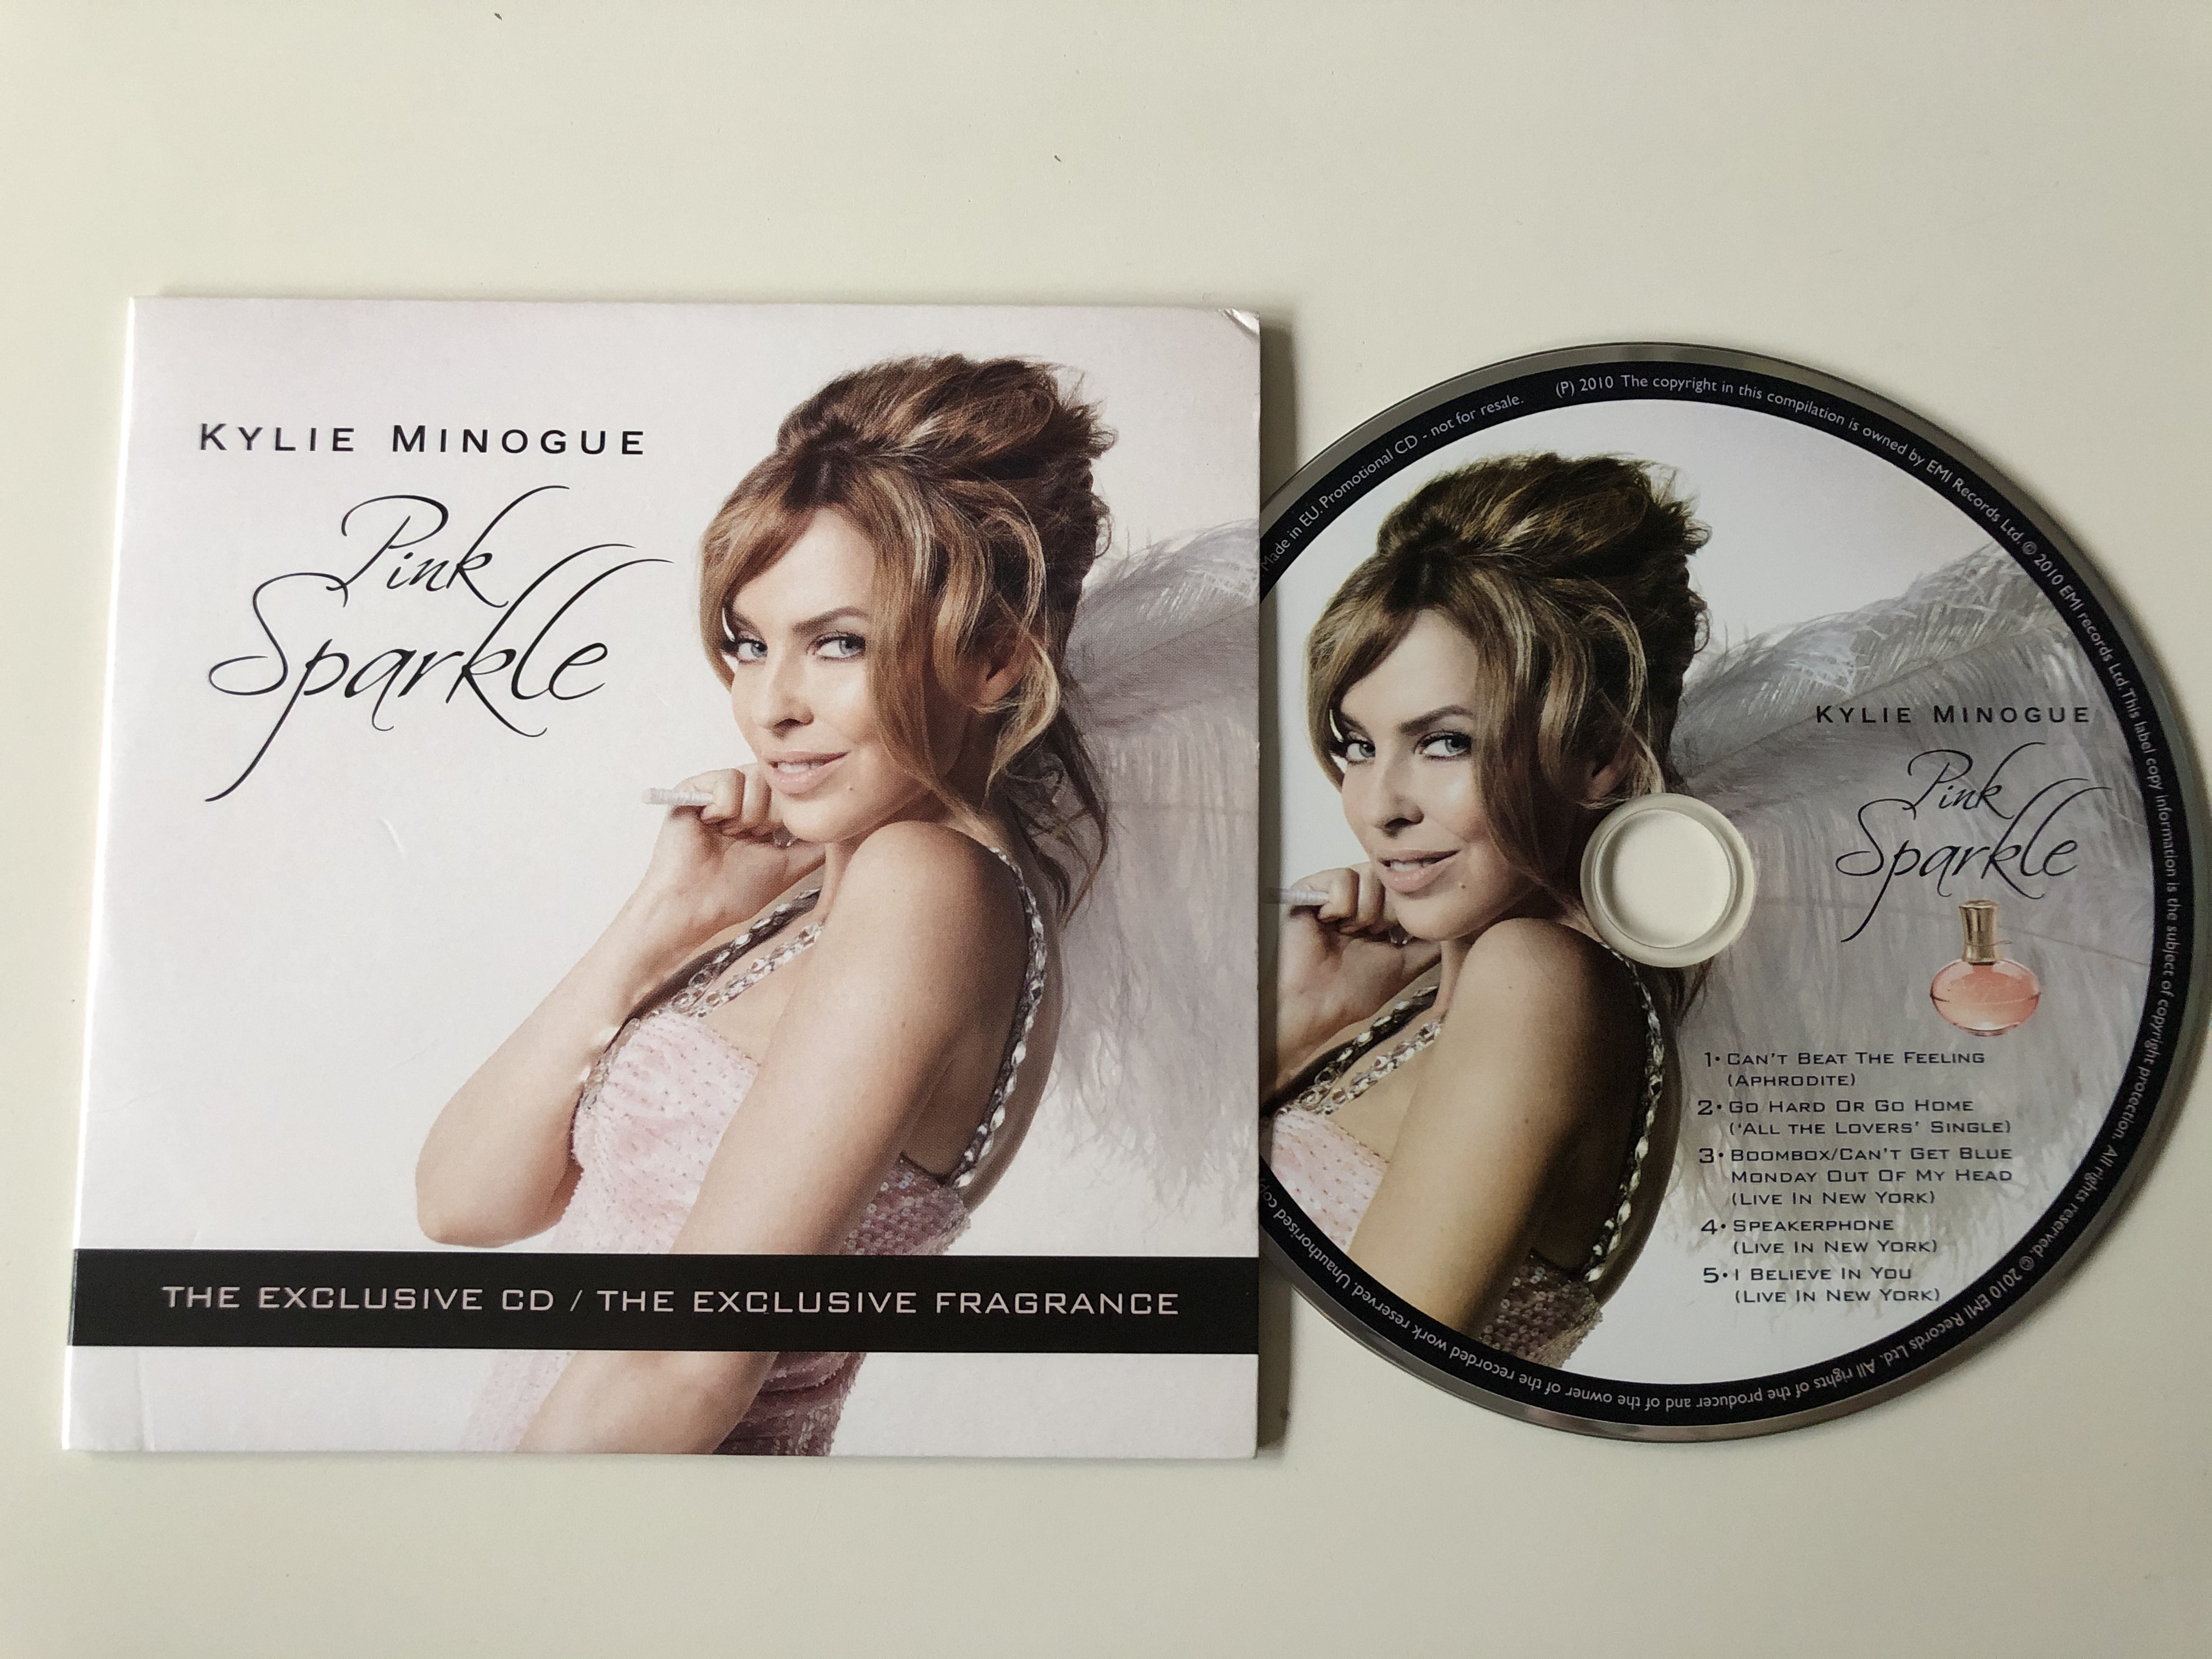 kylie-minogue-pink-sparkle-the-exclusive-cd-the-exclusive-fragrance-parlophone-audio-cd-2010-3607345564722-2-.jpg